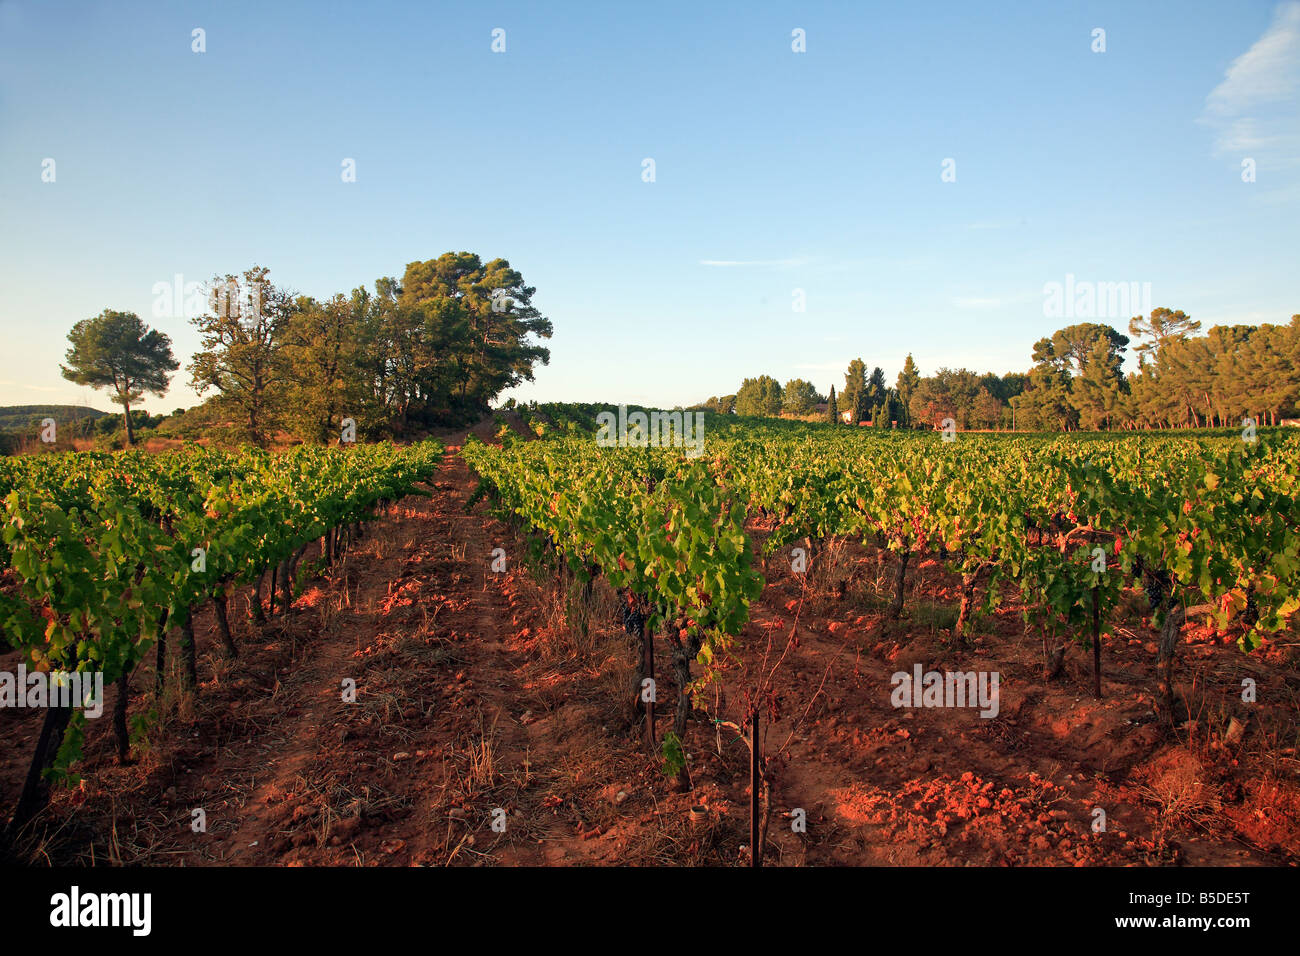 A vinyard in Provence, France Stock Photo